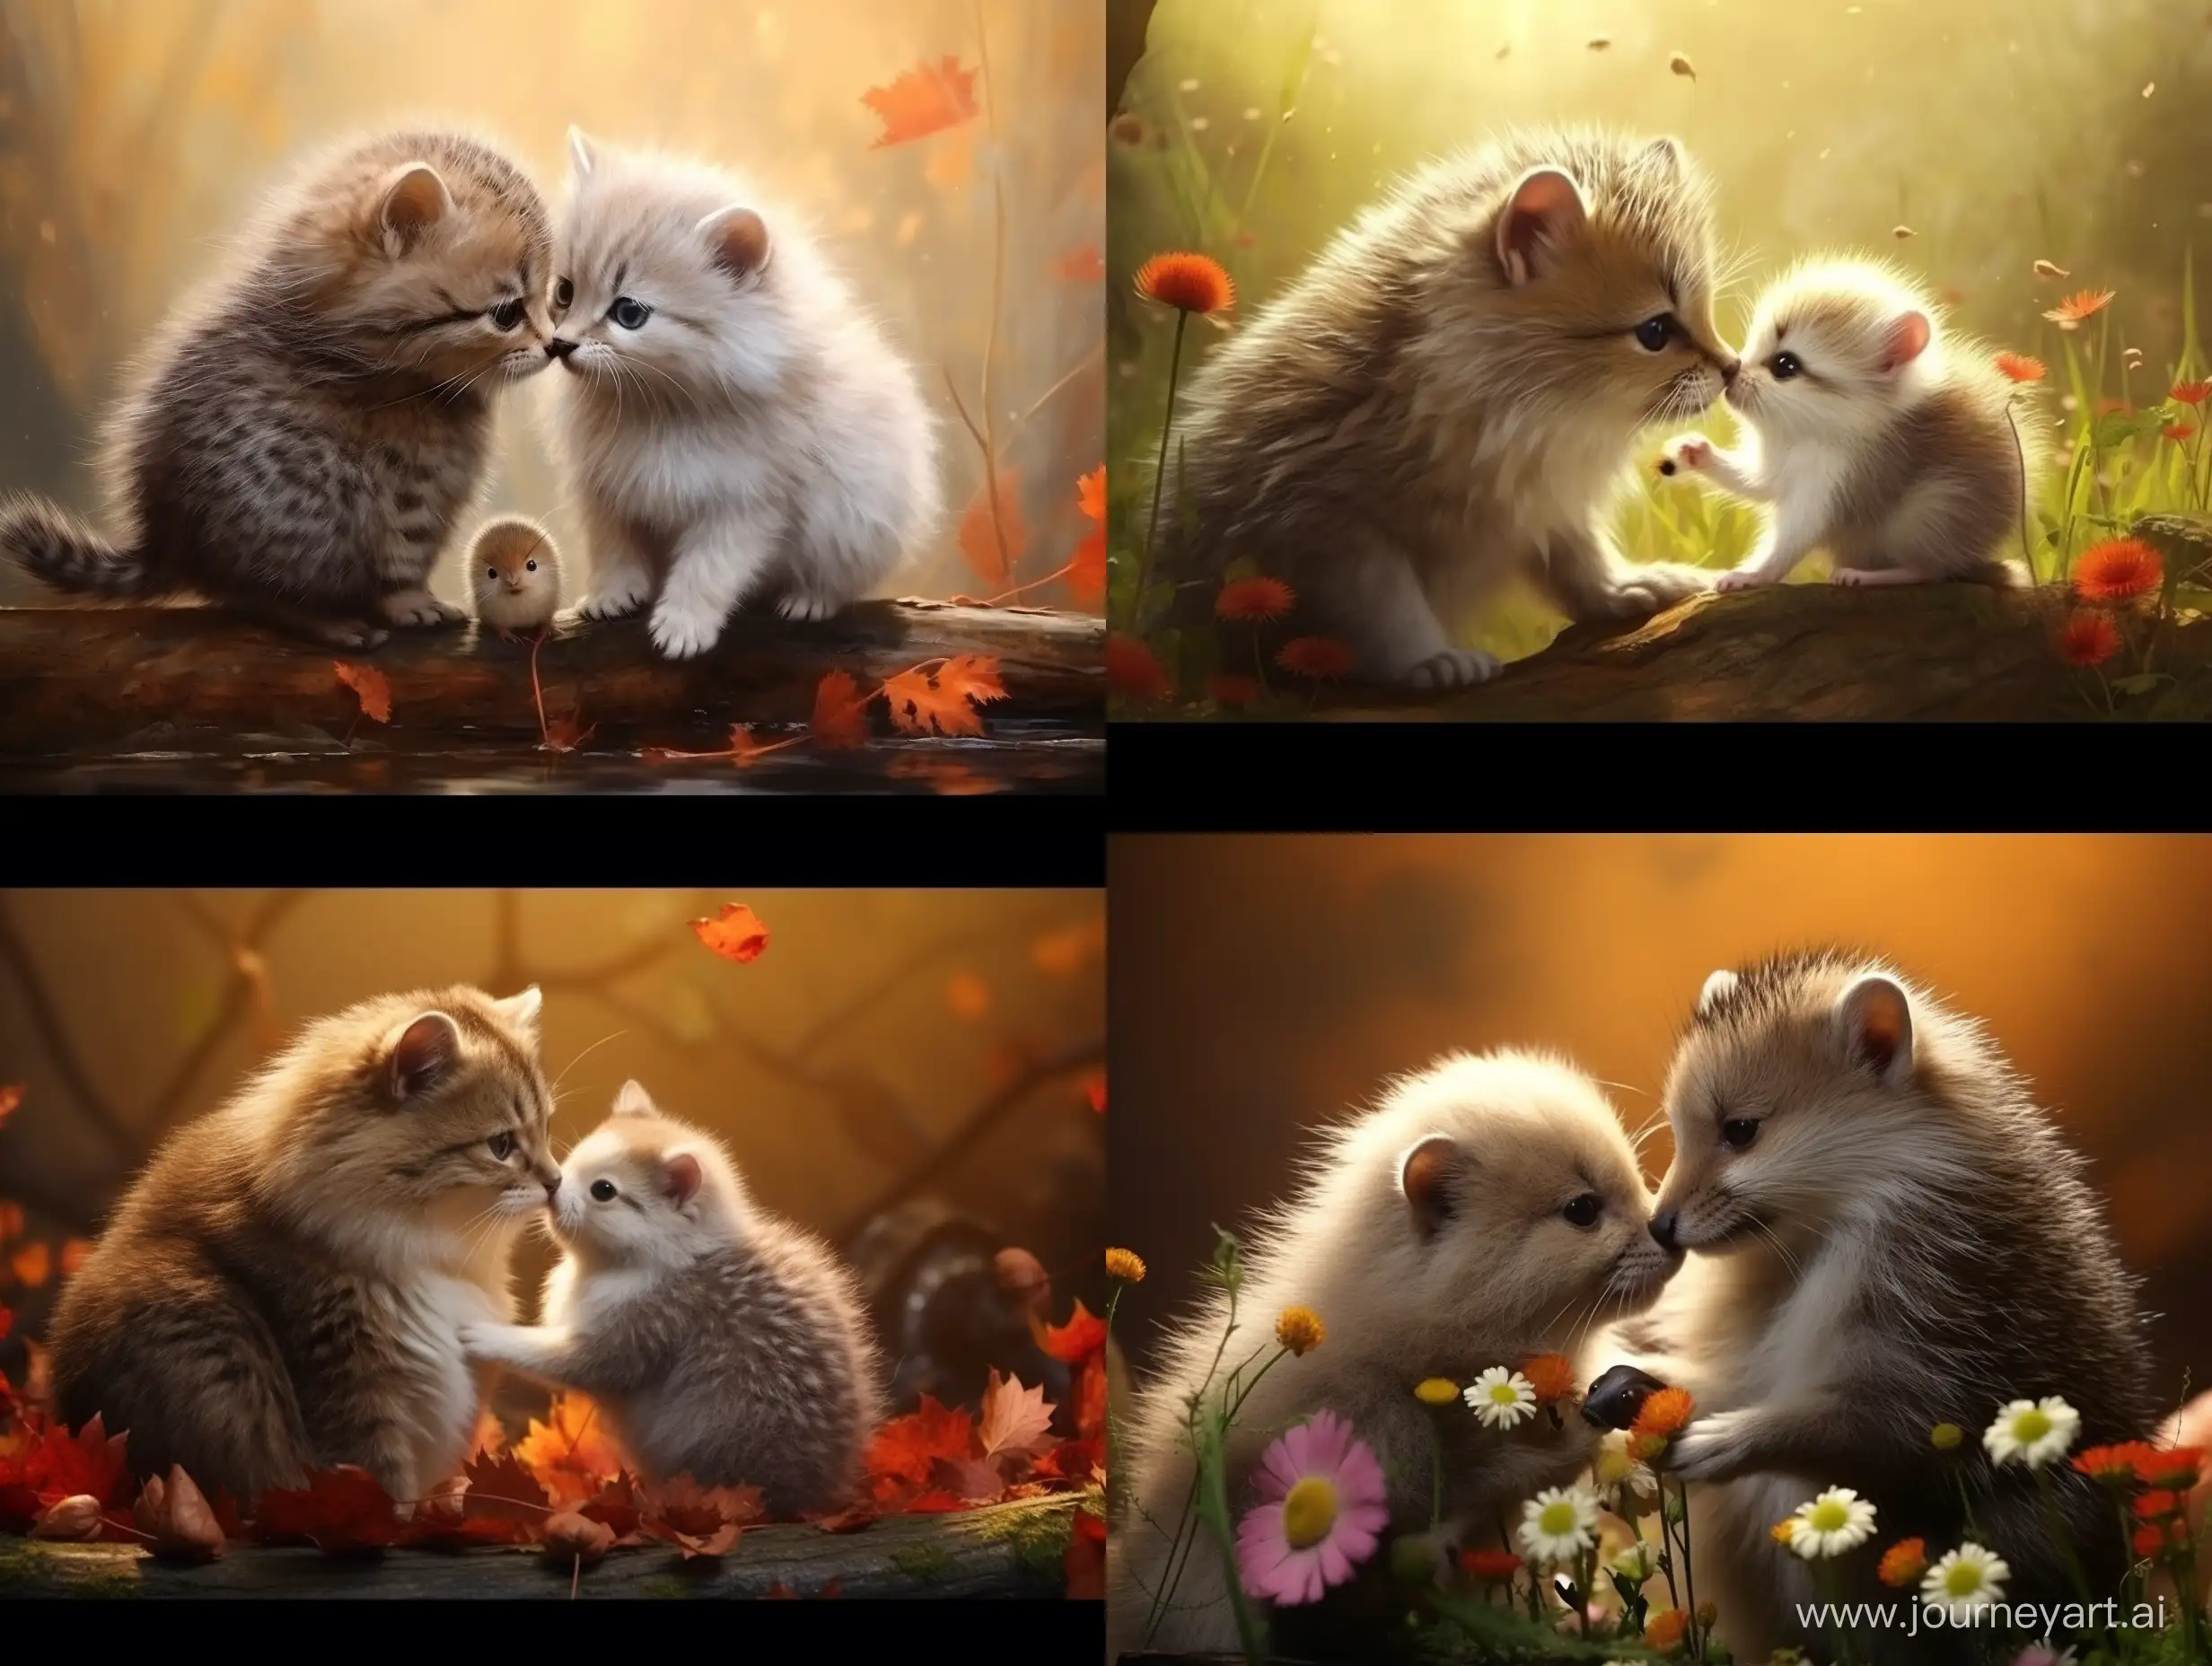 cat and hedgehog play, hug and kissing each other